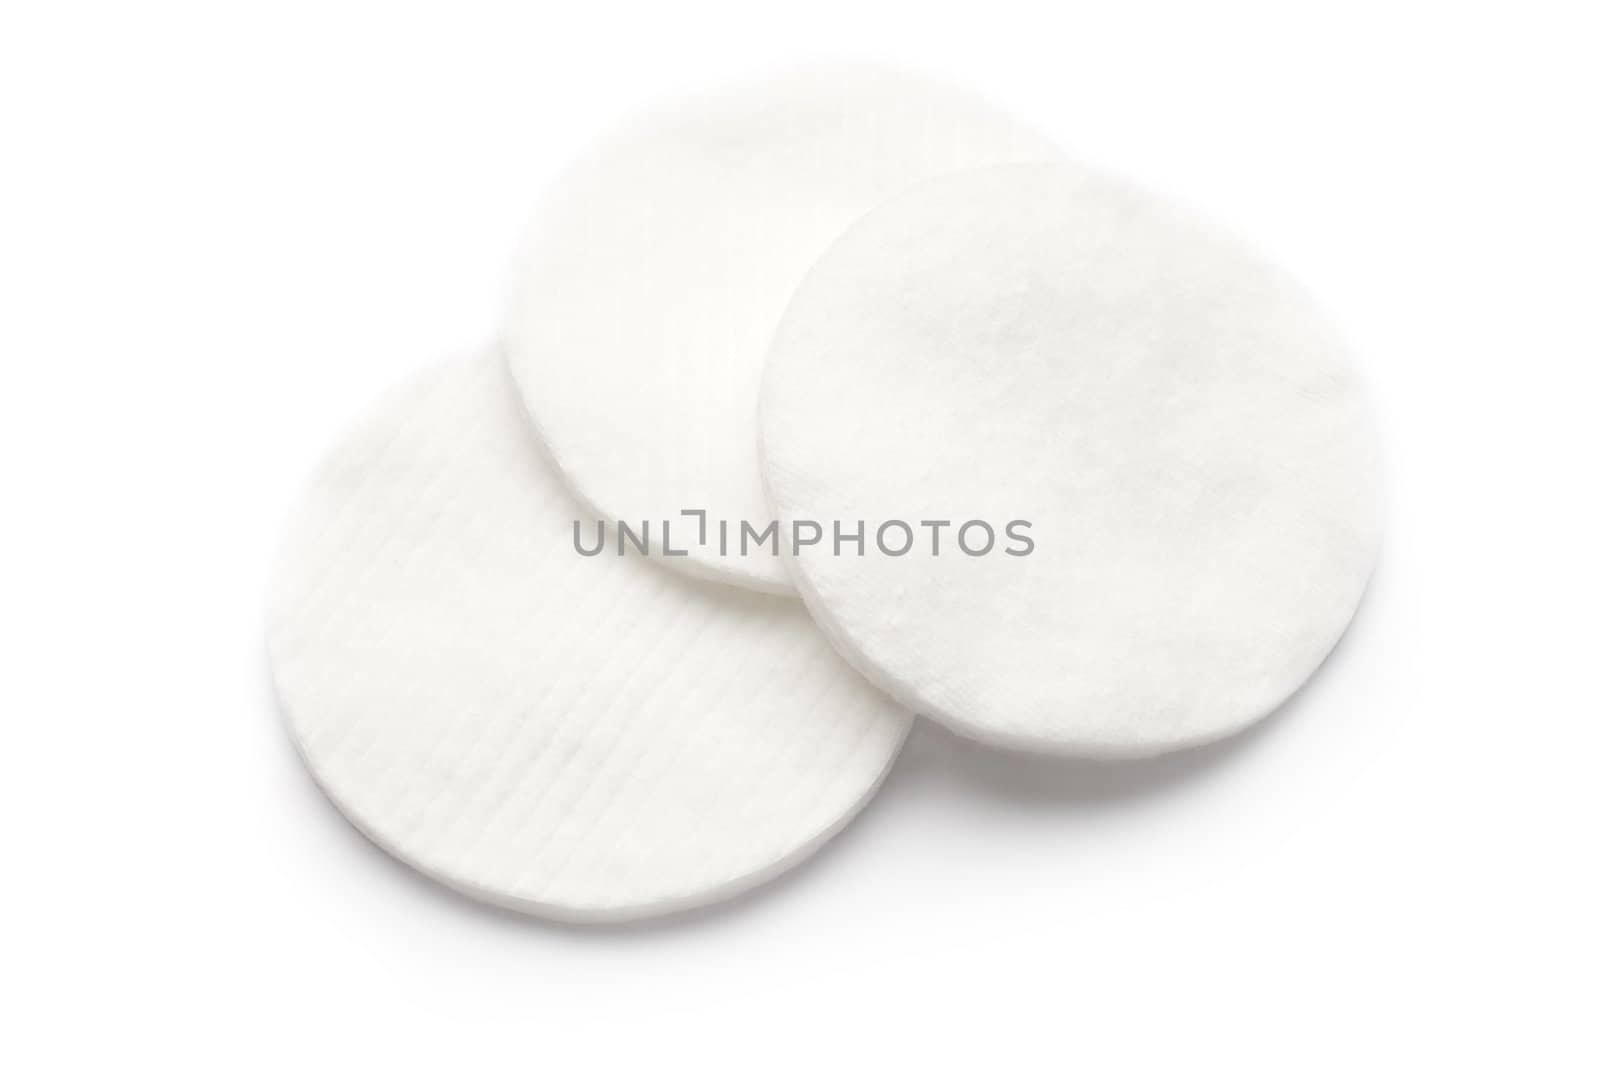 Cotton swabs isolated on white